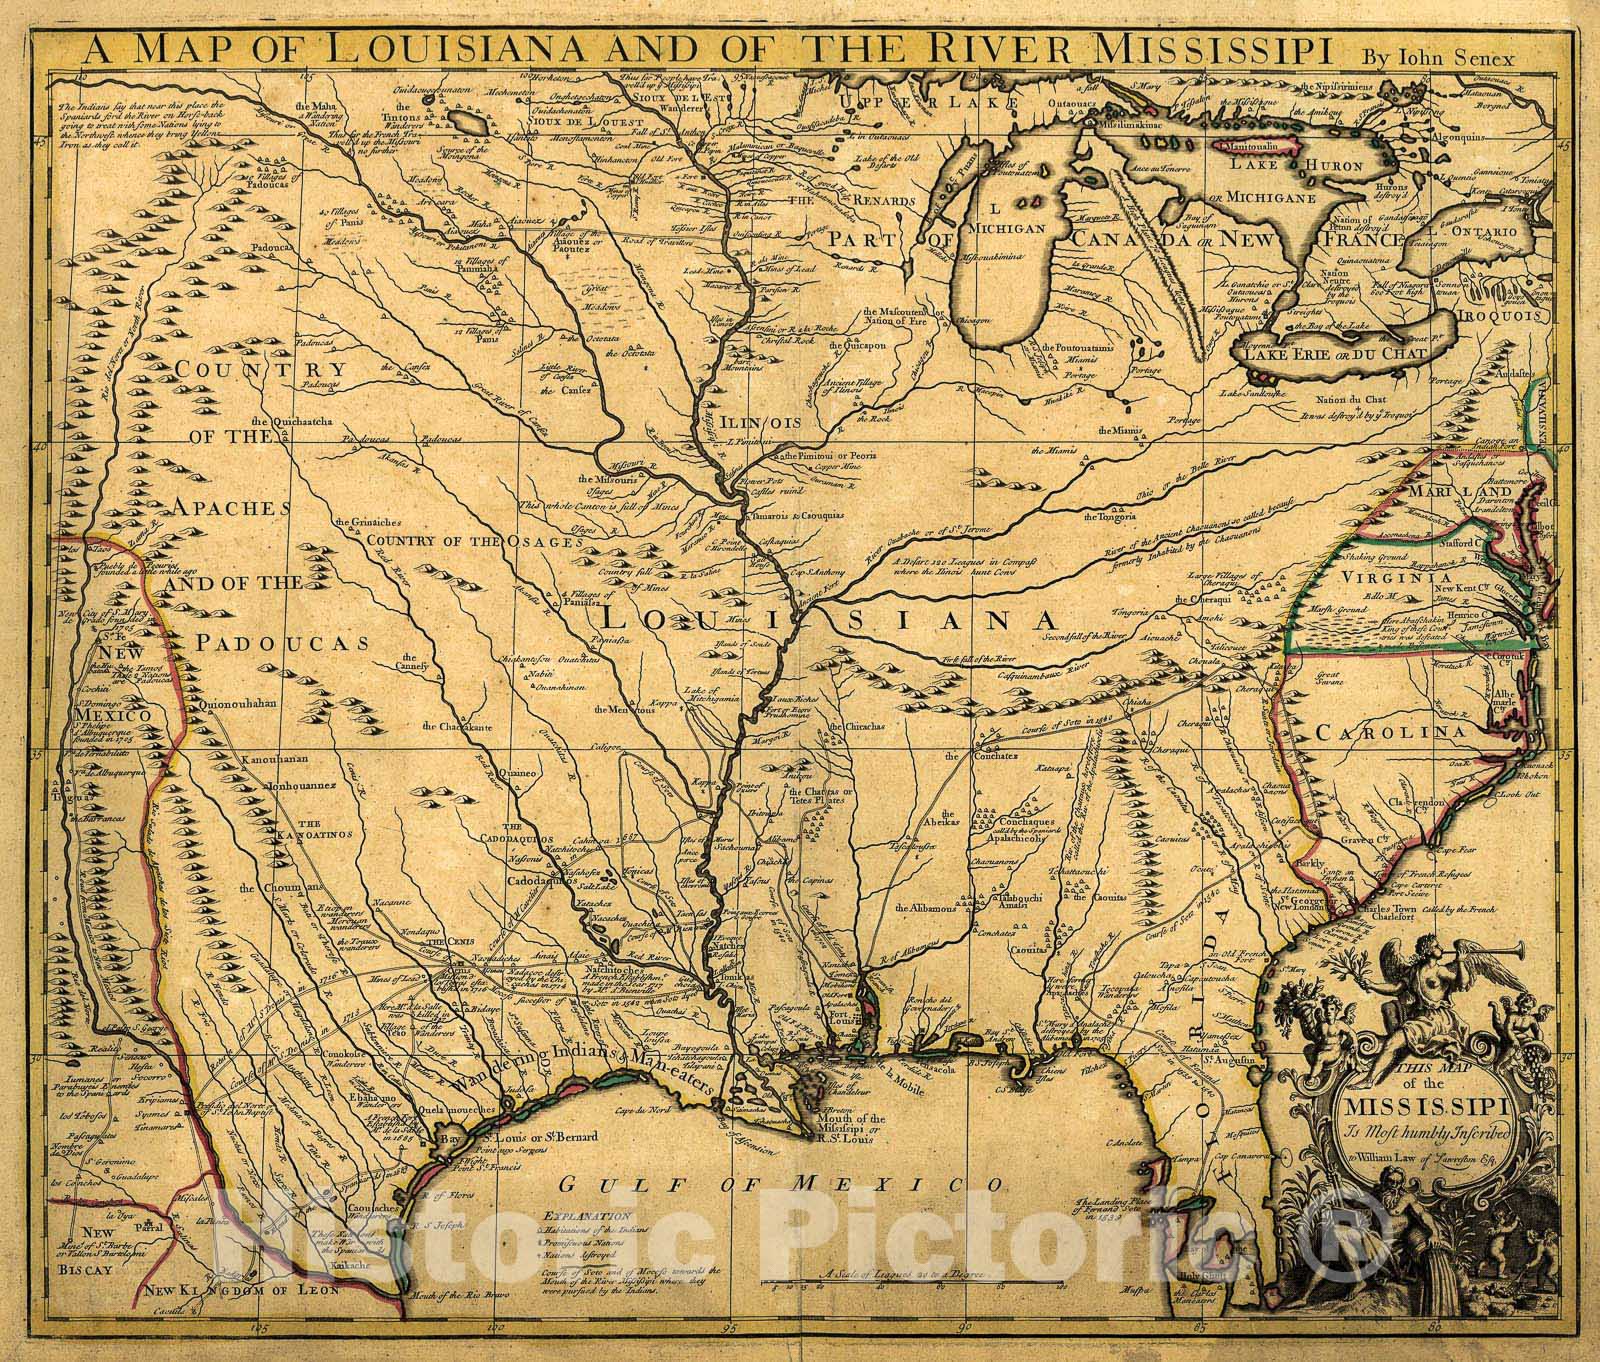 Historic 1721 Map - A map of Louisiana and of The River Mississipi i.e. Mississippi : This map of The Mississipi i.e. Mississippi